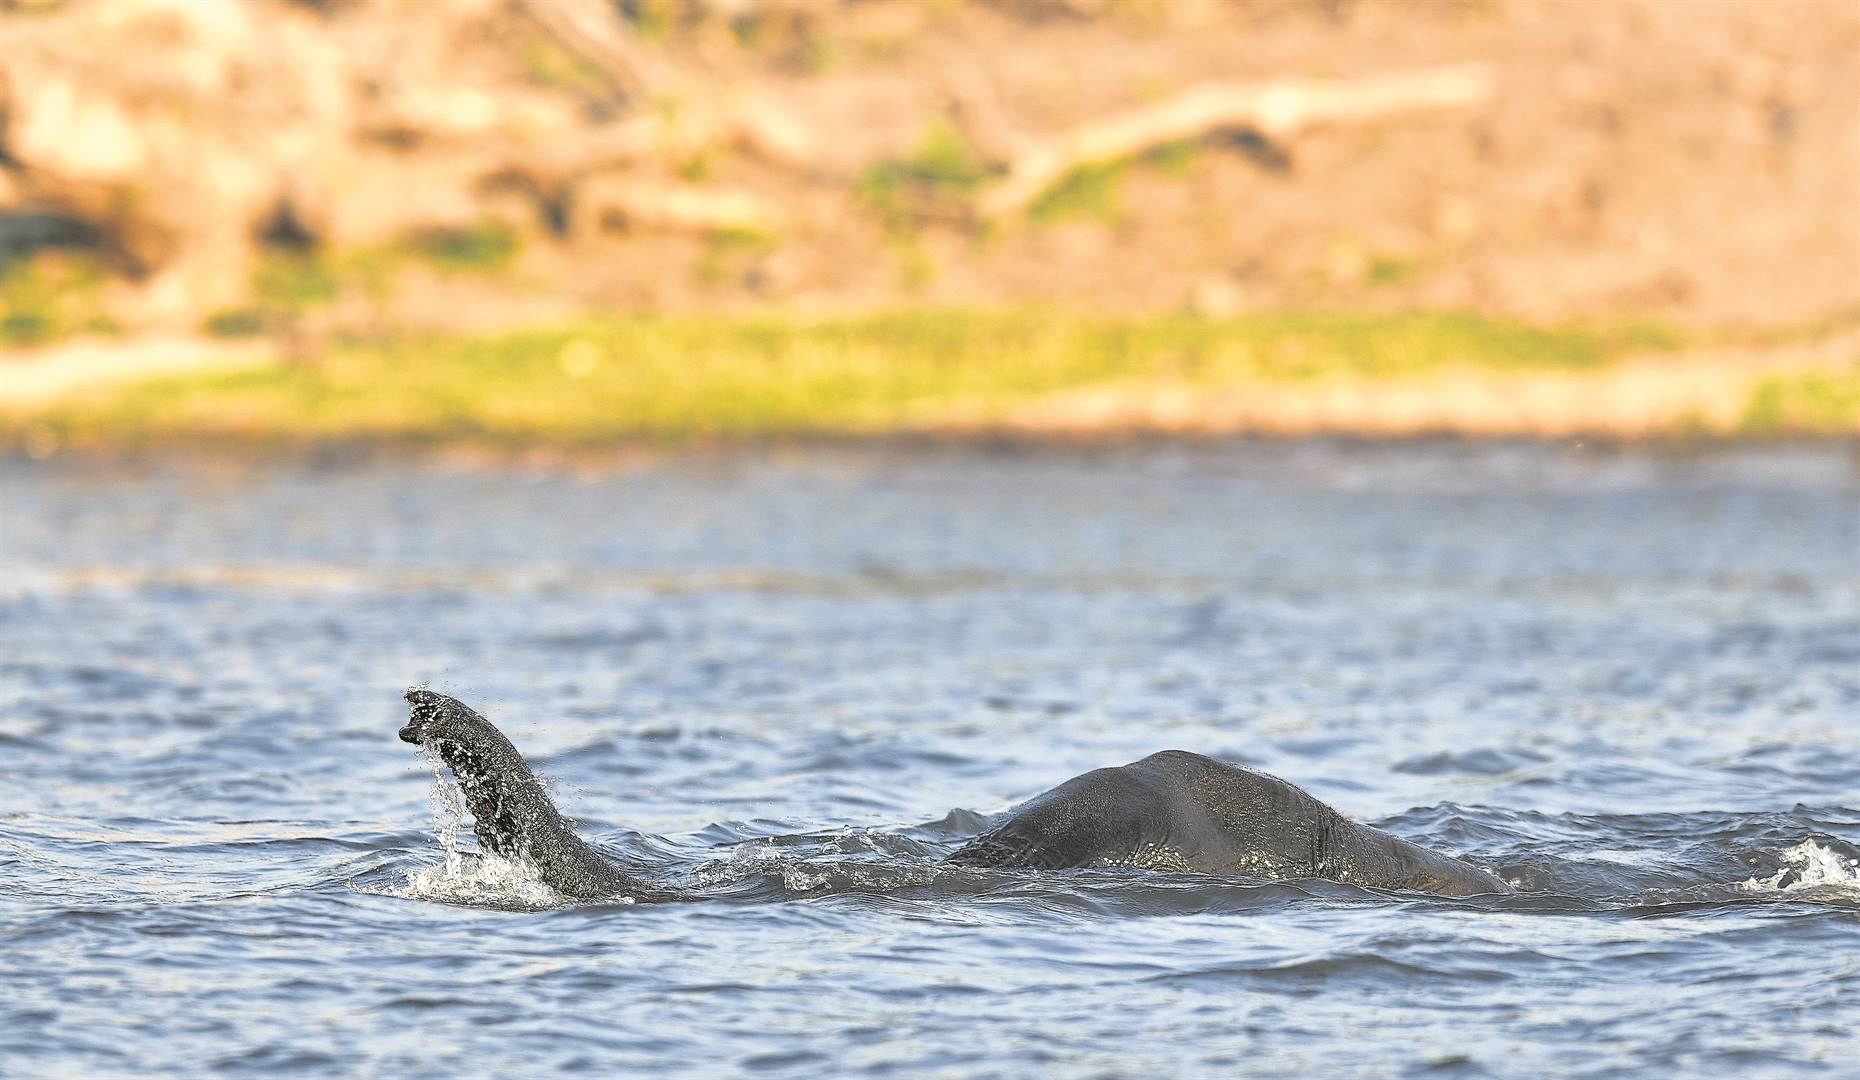 An elephant swimming in the Chobe River delights tourists but the local community lives in fear of being attacked. Picture: Sizwe Ndingane / The Republic Production / Nikon